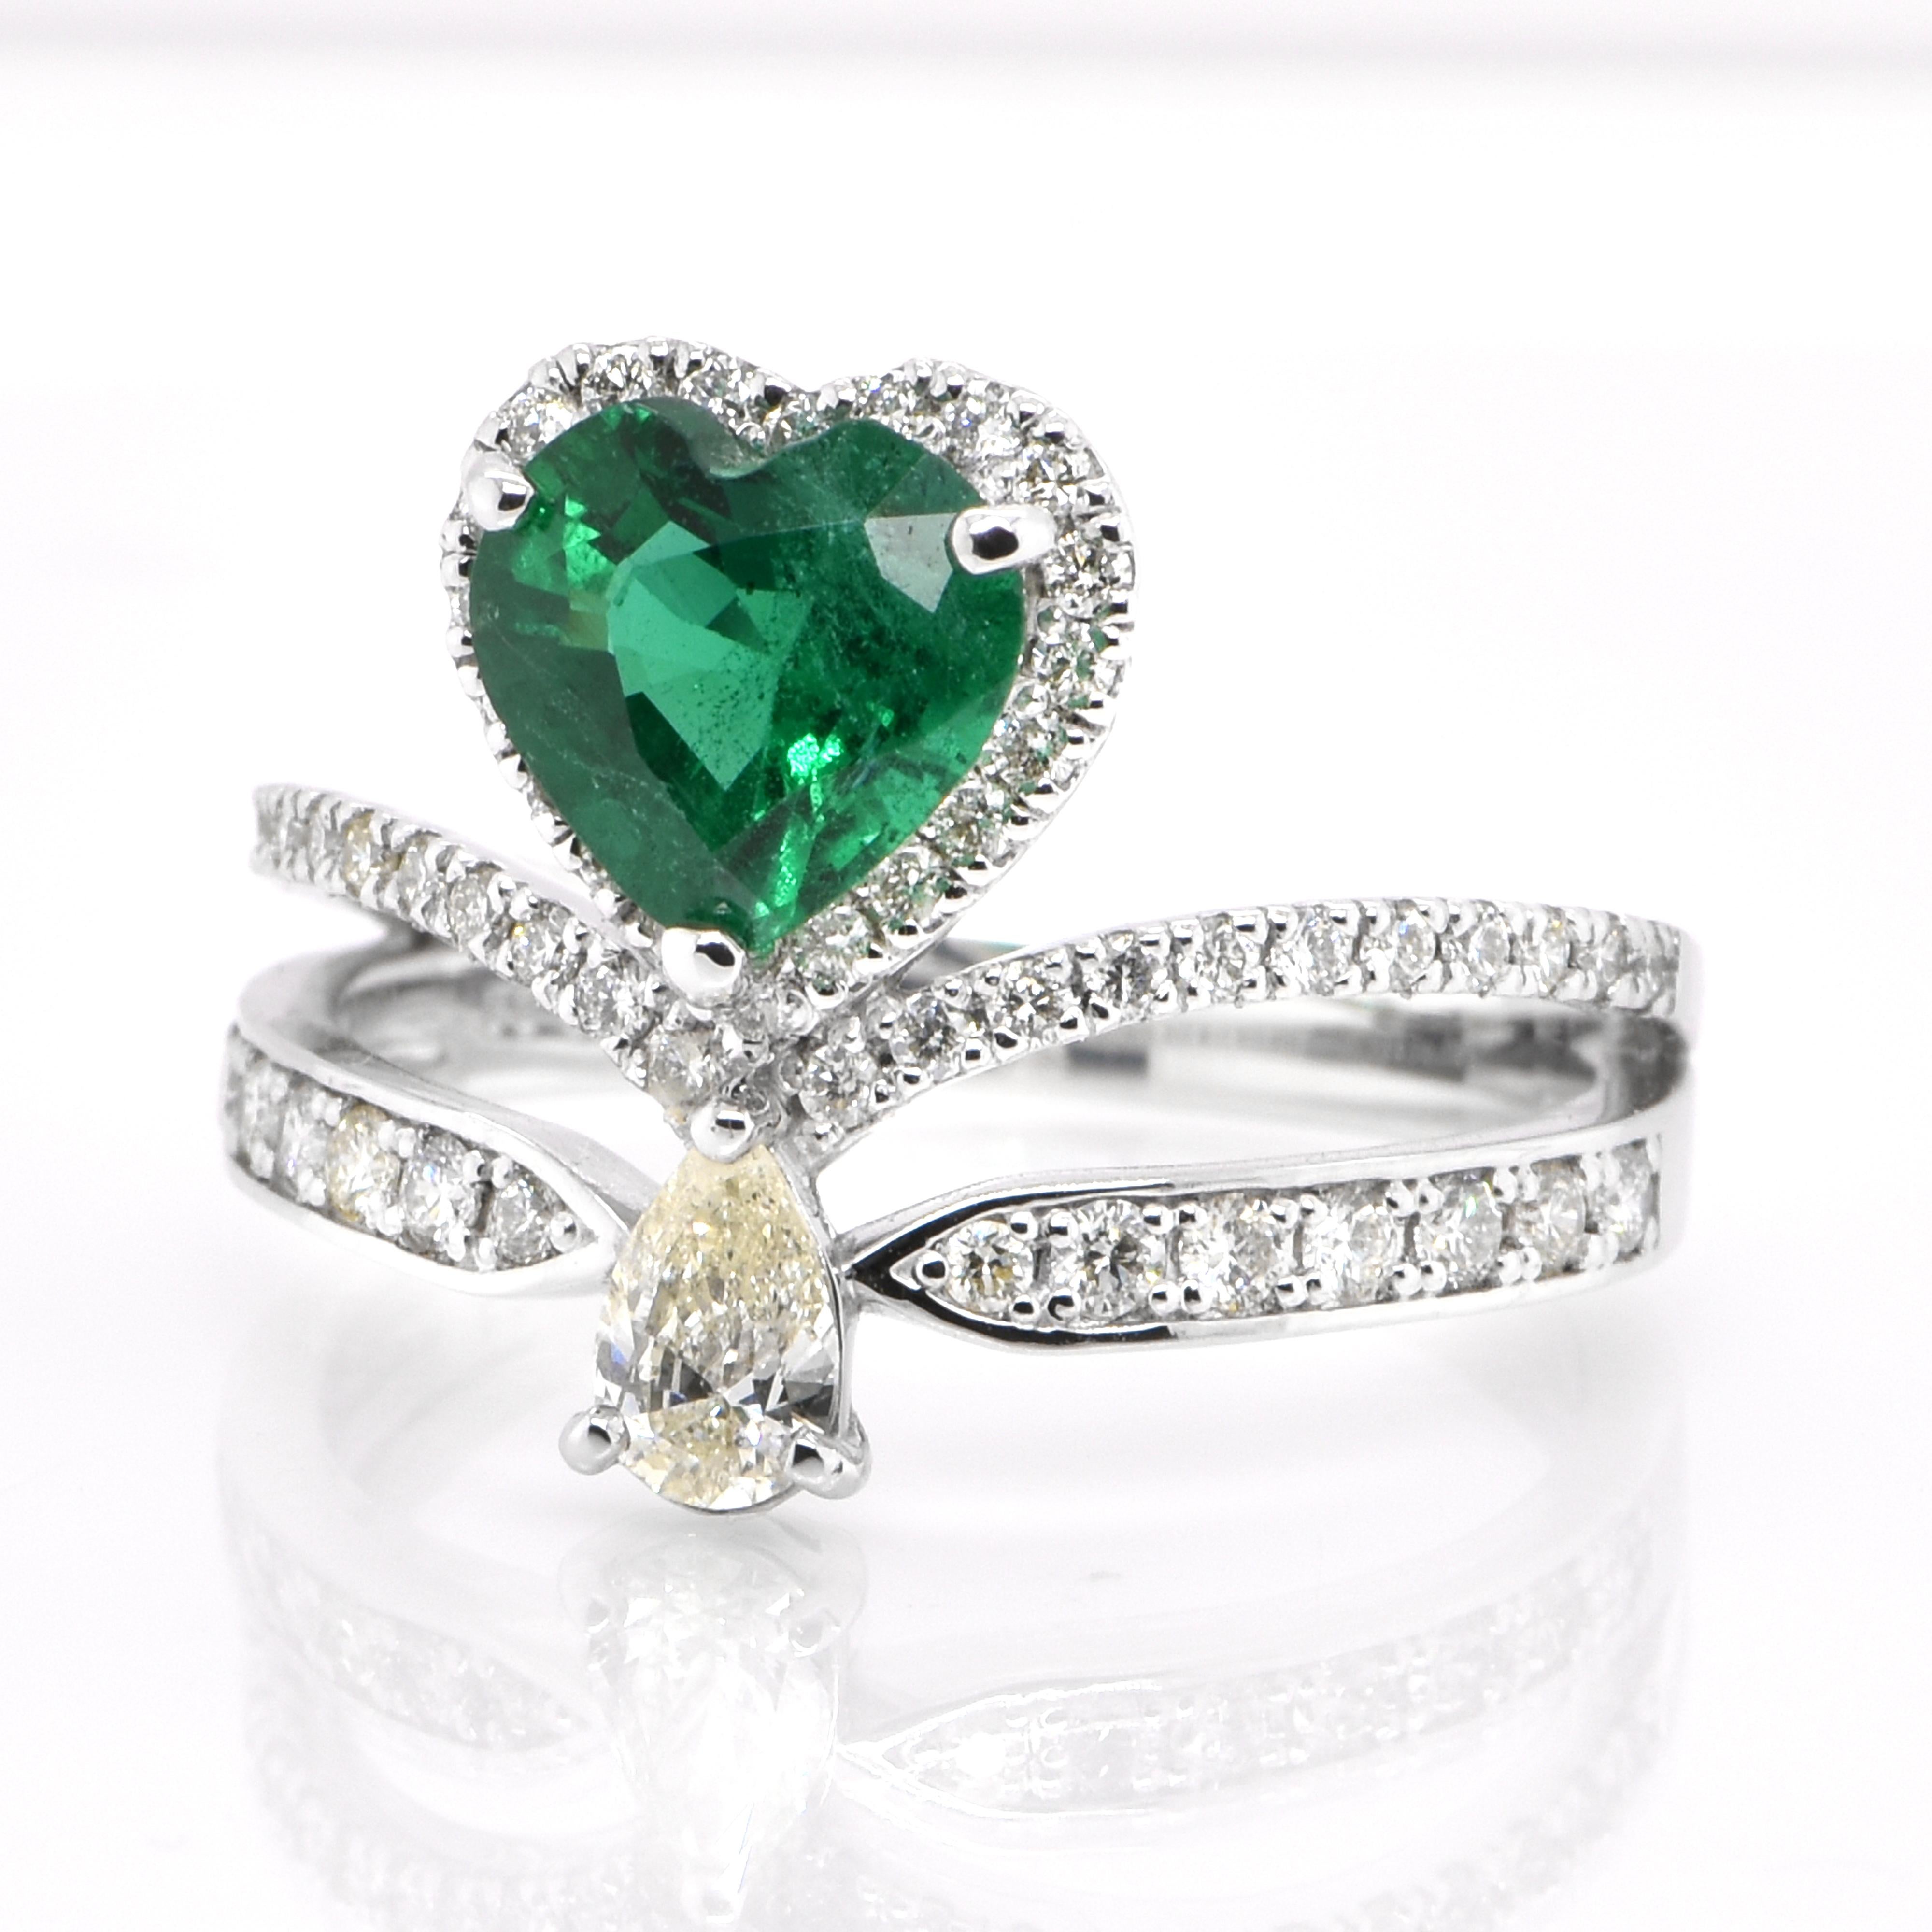 A stunning ring featuring a 1.20 Carat Natural Zambian Emerald and 0.68 Carats of Diamond Accents set in Platinum. People have admired emerald’s green for thousands of years. Emeralds have always been associated with the lushest landscapes and the